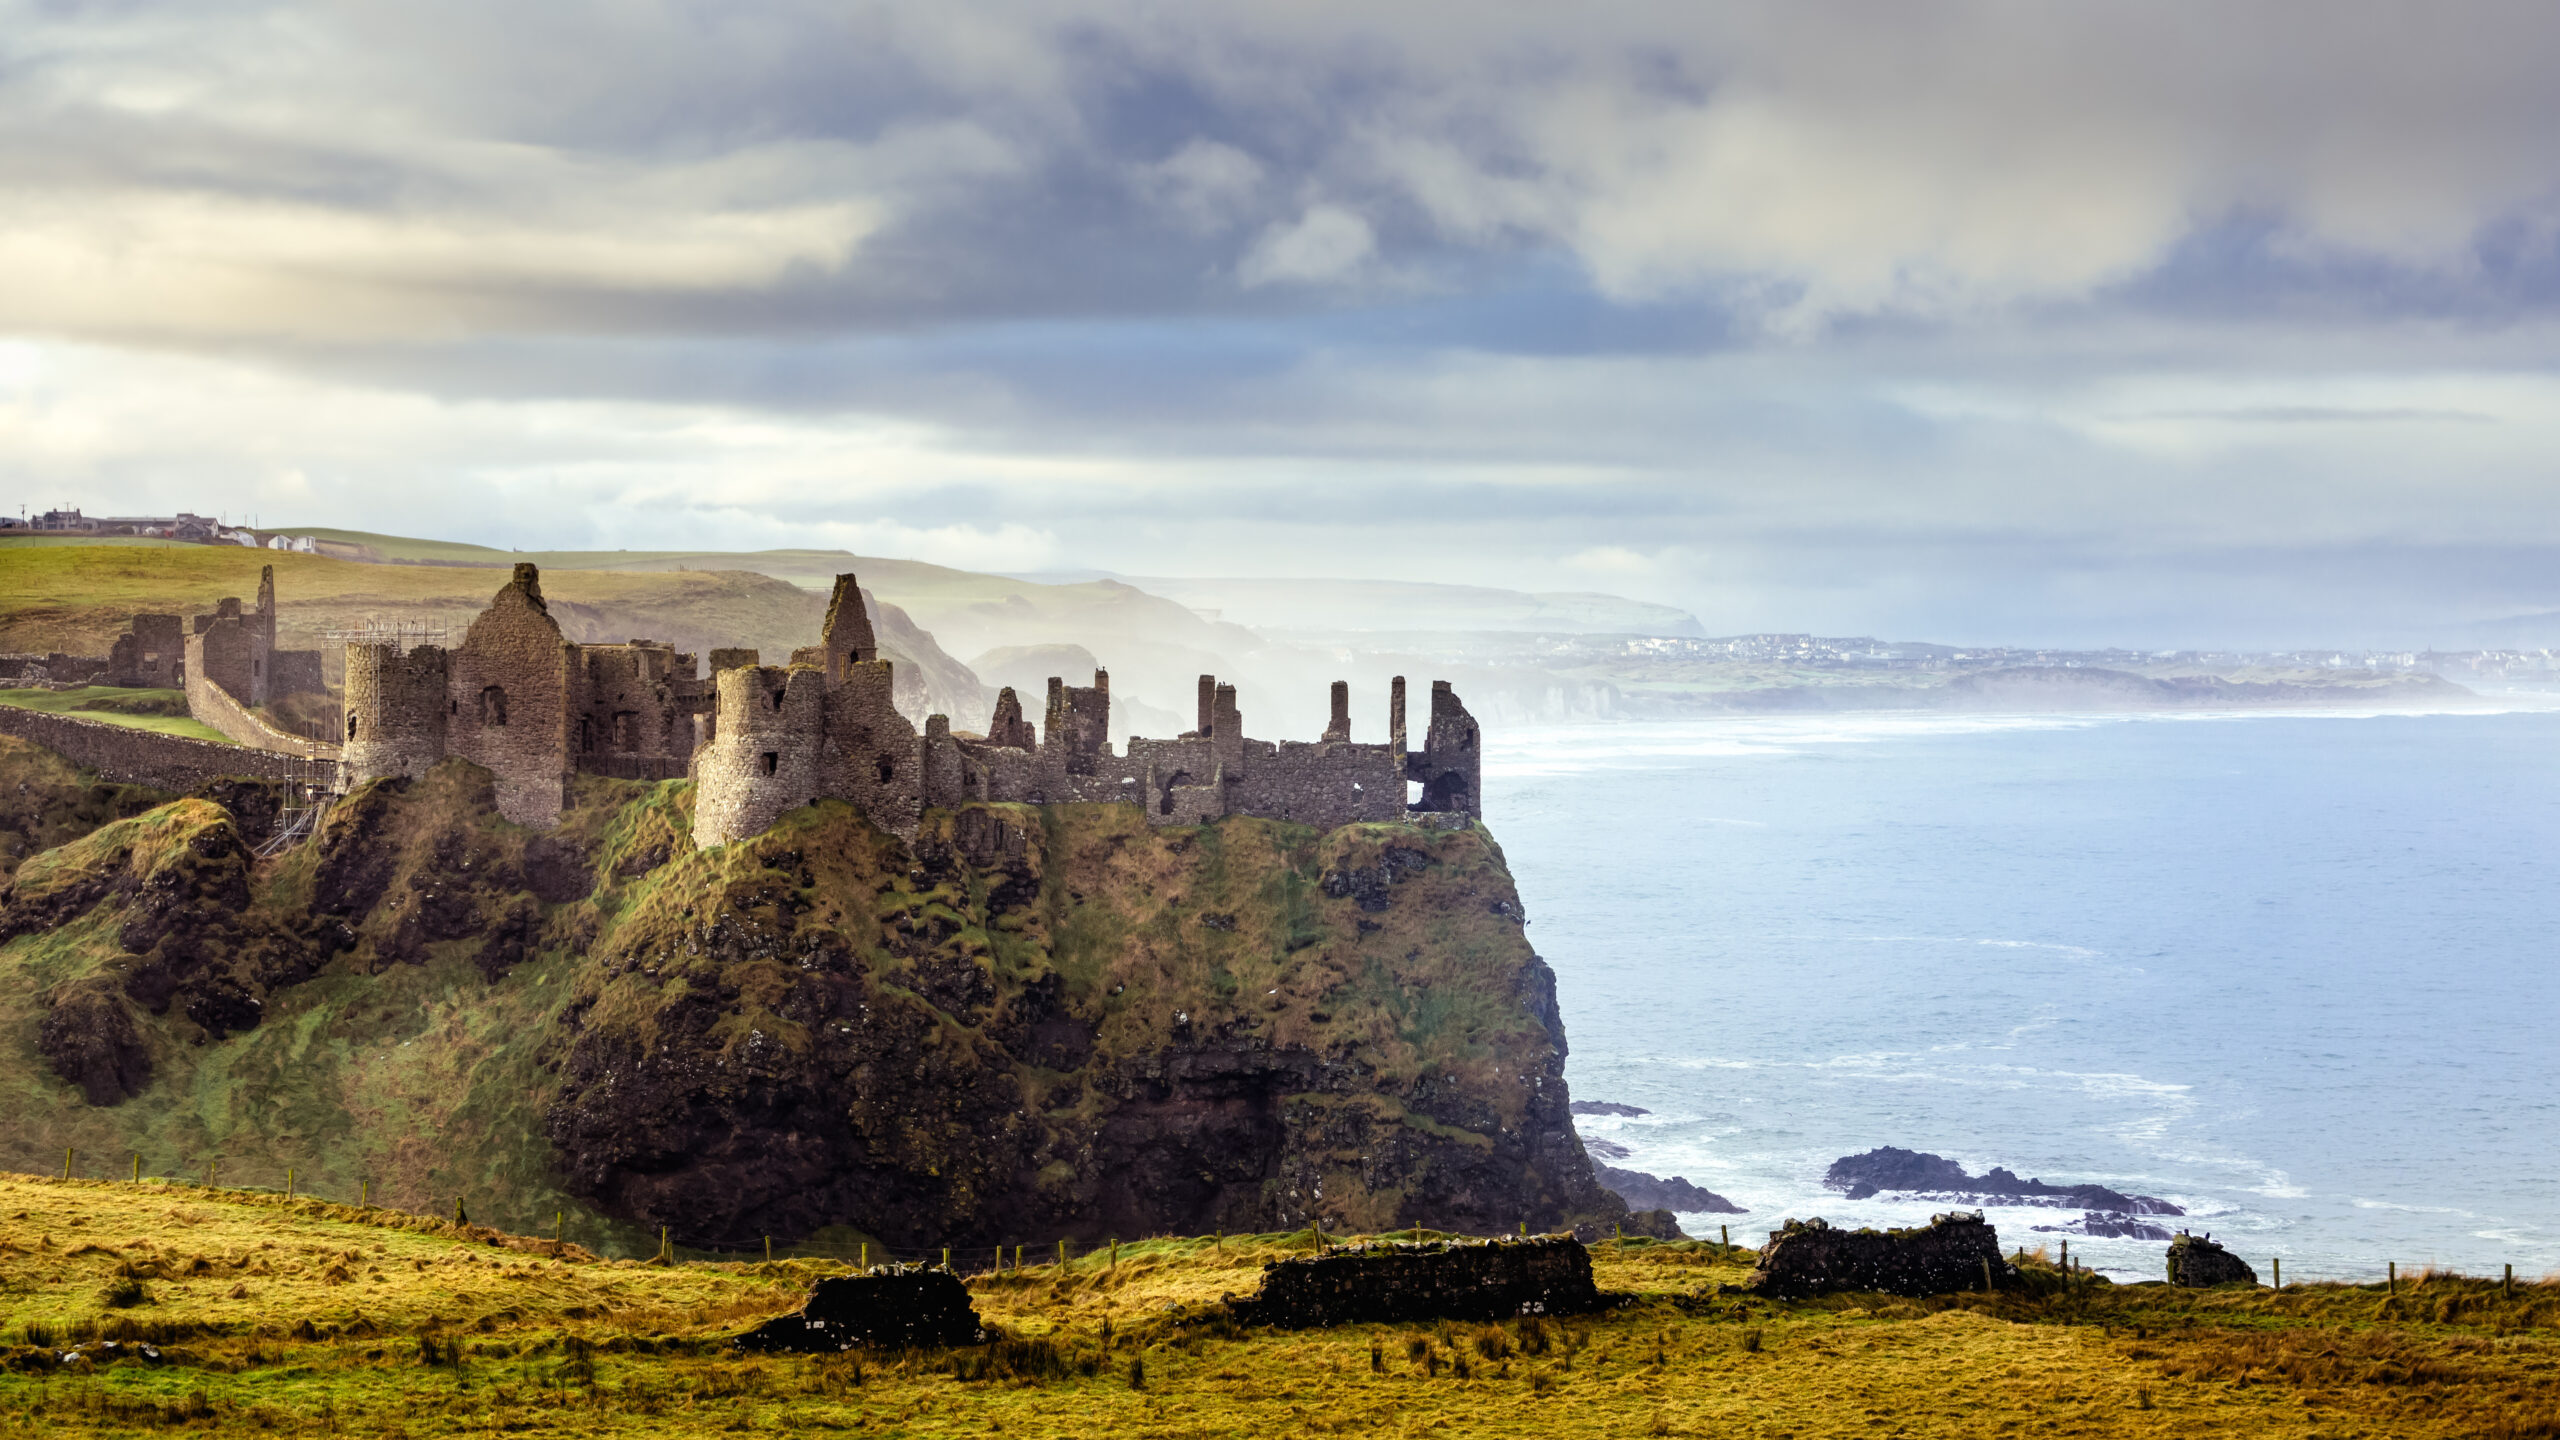 Dunluce Castle on the cliff in Bushmills, filming location of Game of Thrones